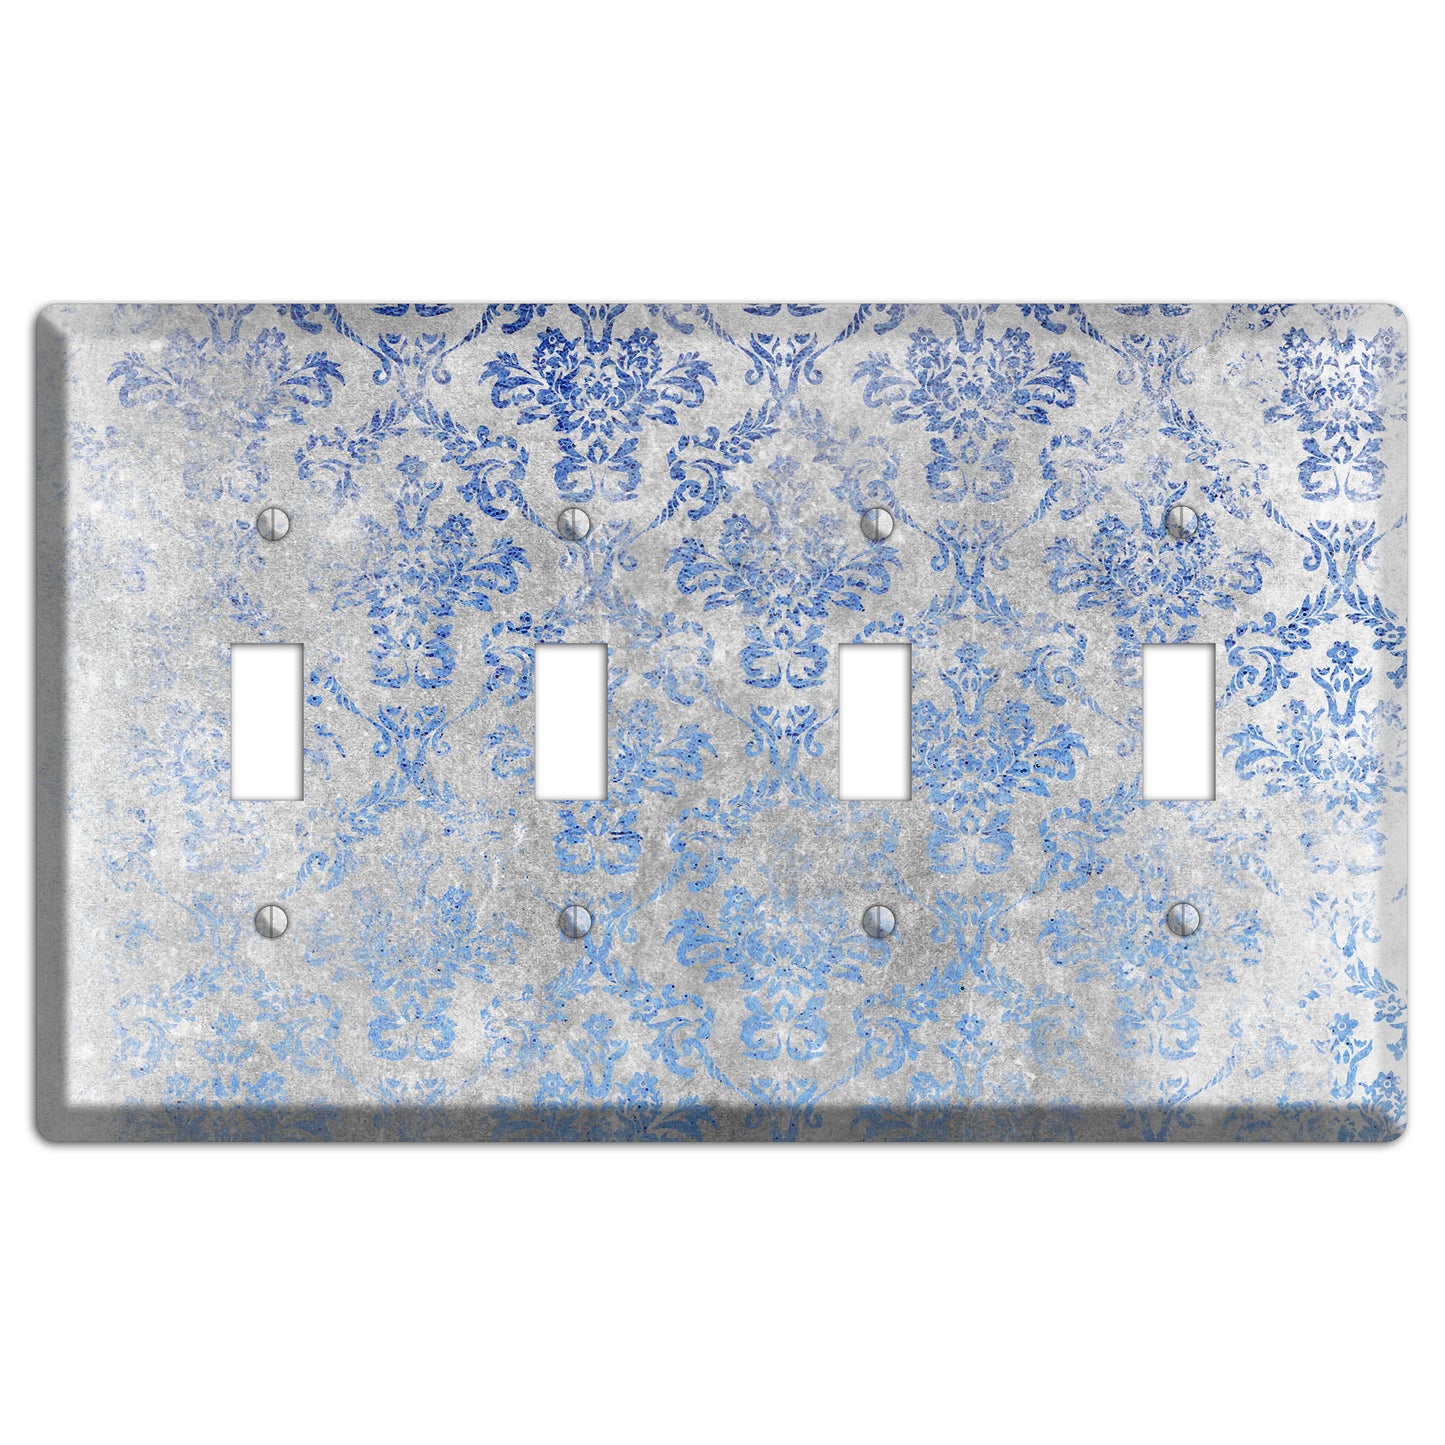 Loblolly Whimsical Damask 4 Toggle Wallplate